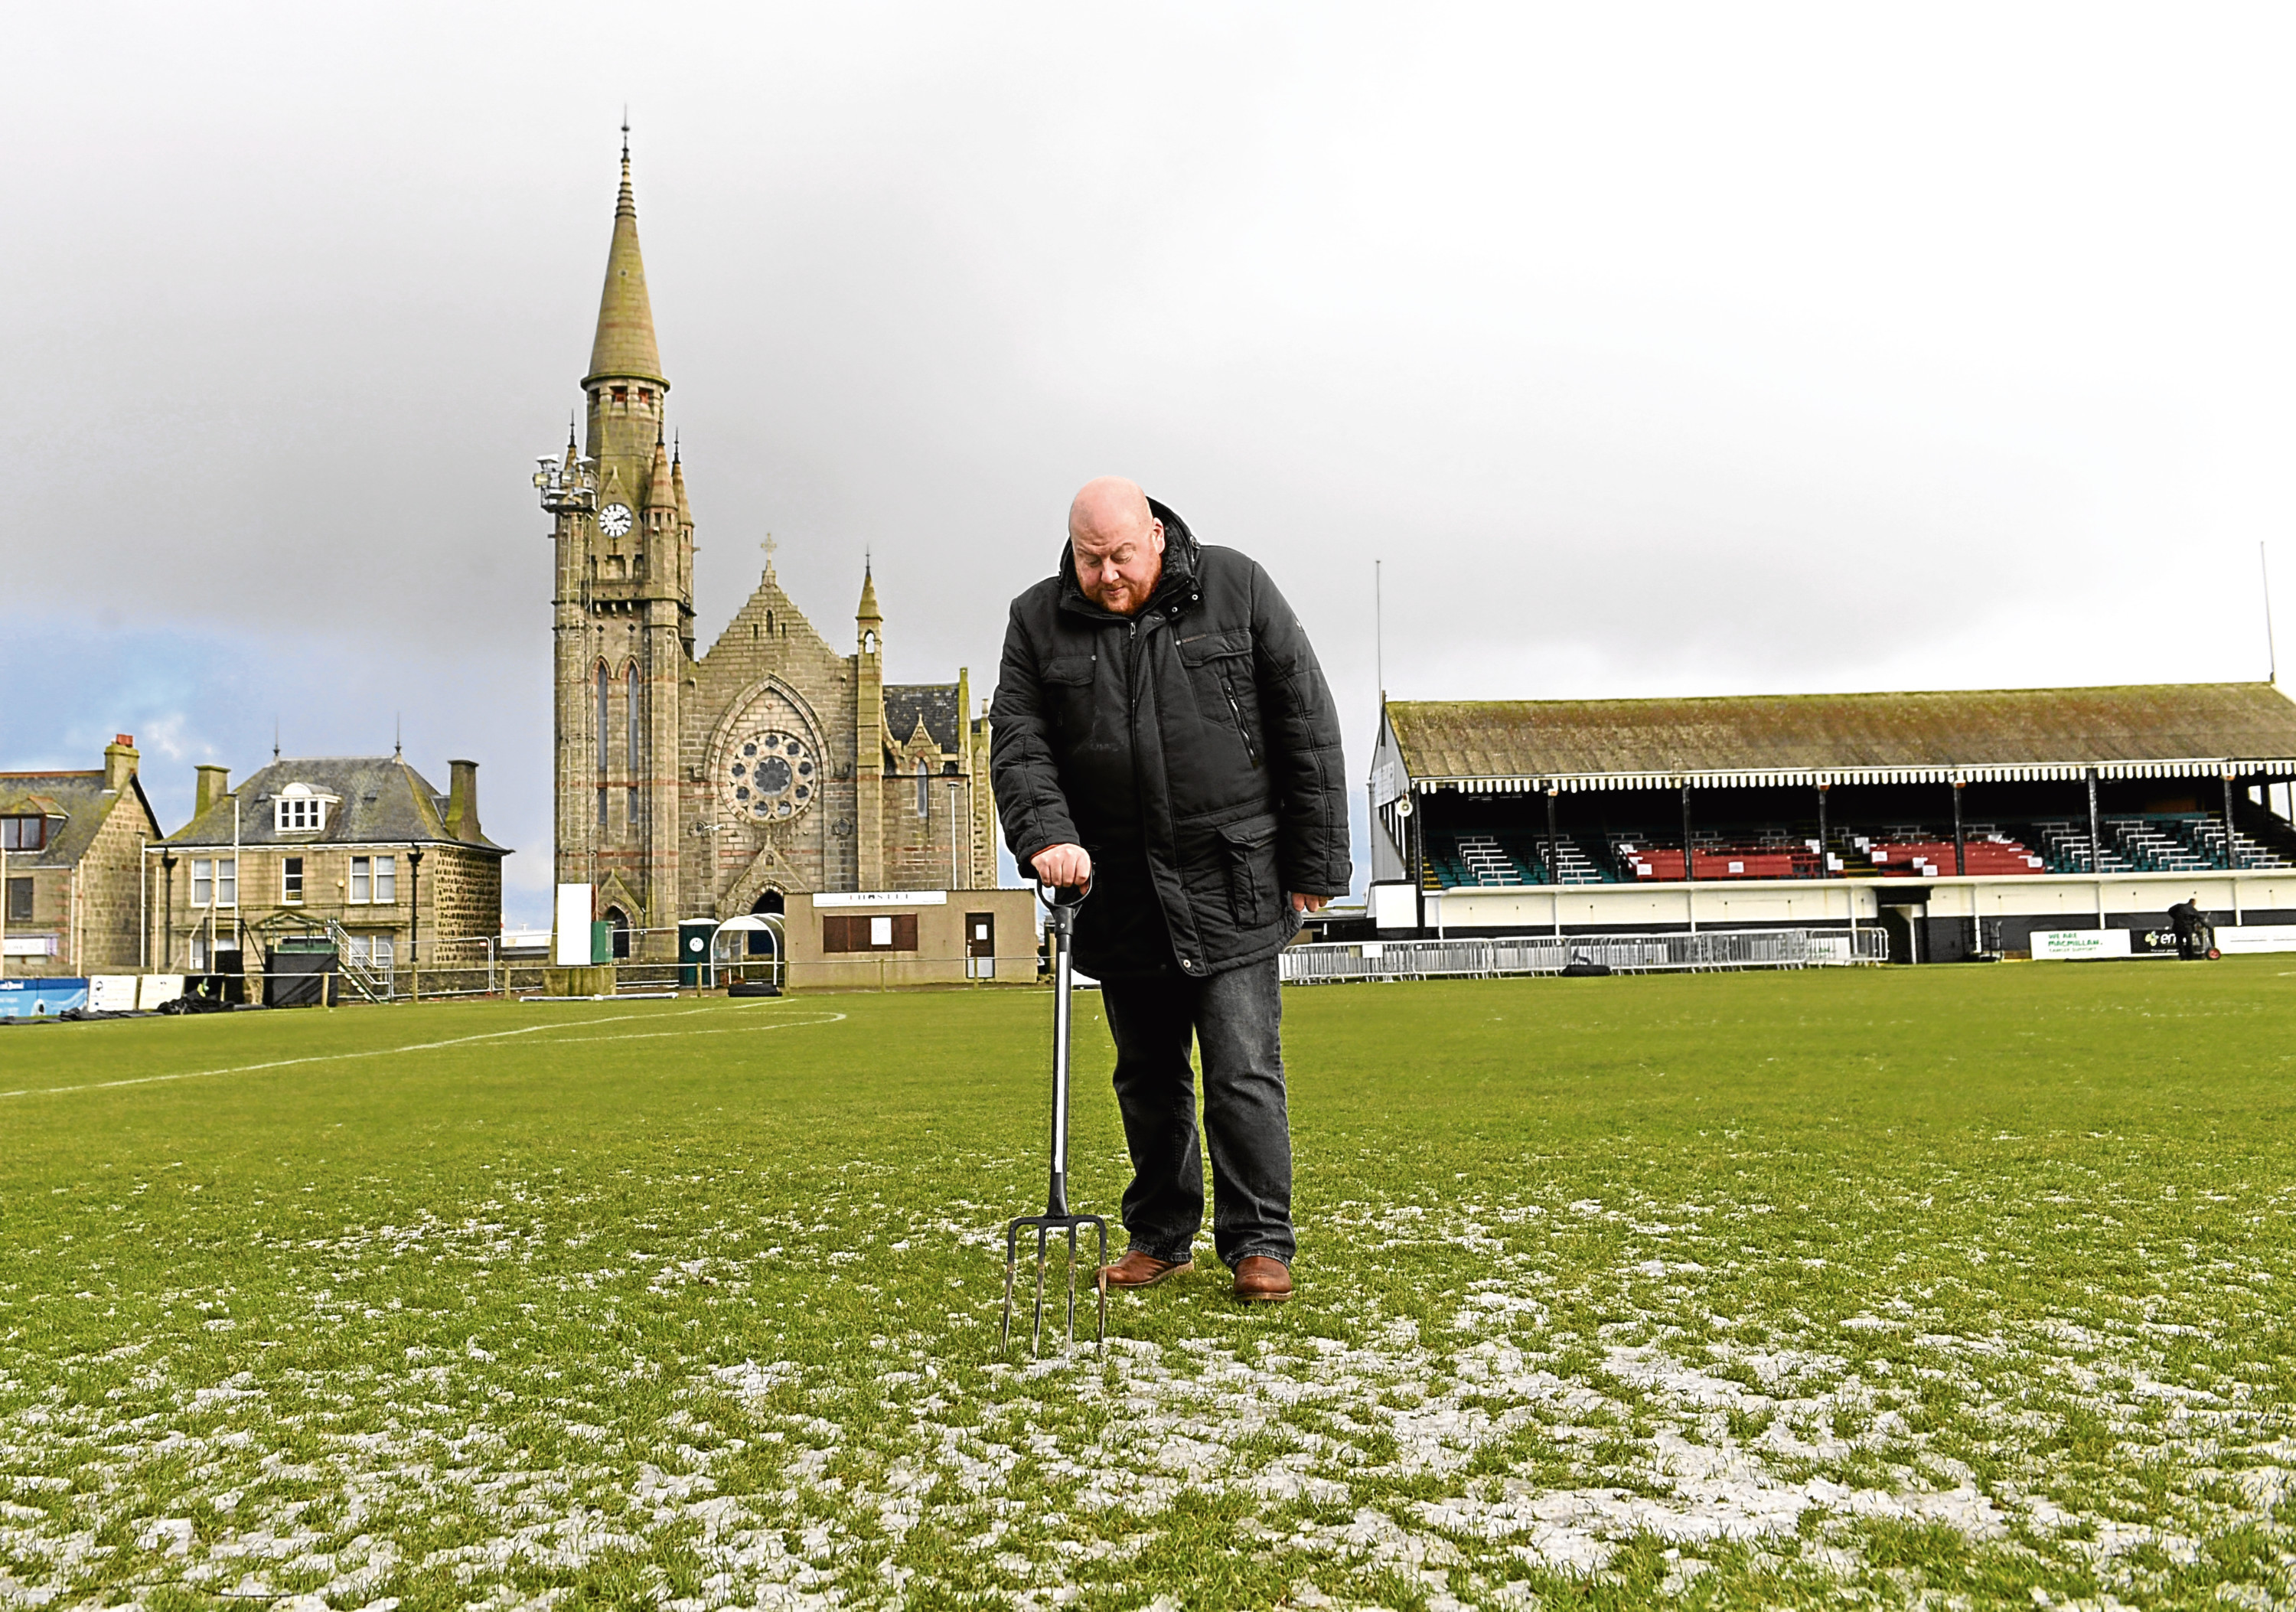 An icy pitch at Bellslea Park meant Fraserburgh's game against Rangers was cancelled.